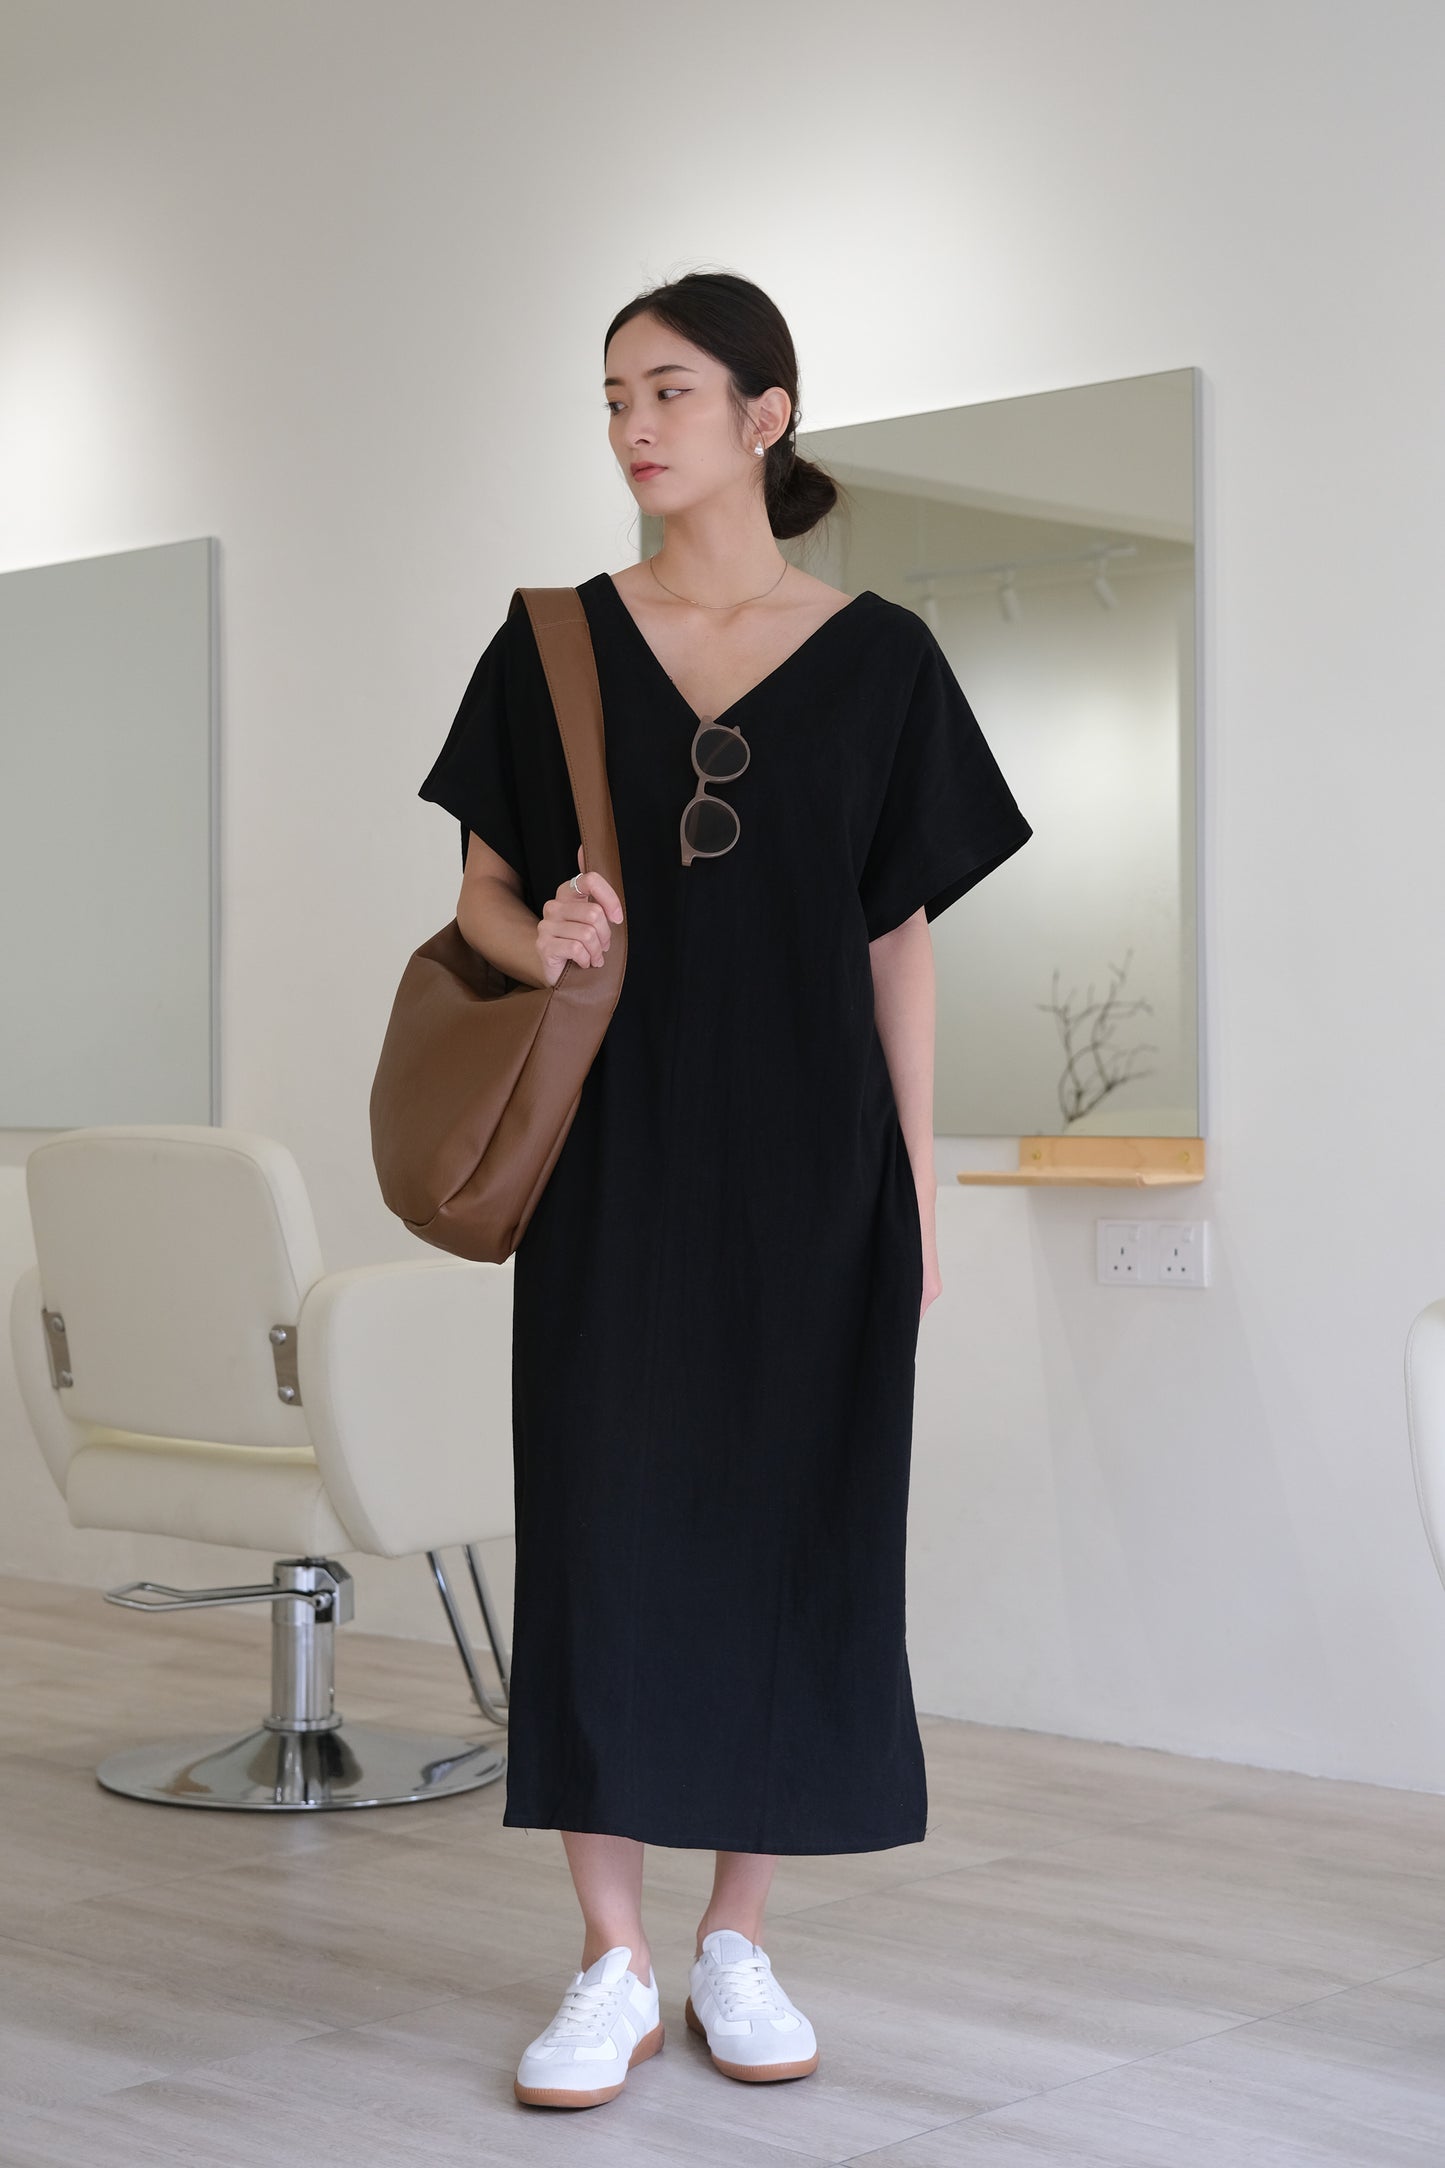 Long, loose short-sleeved dress in classic black